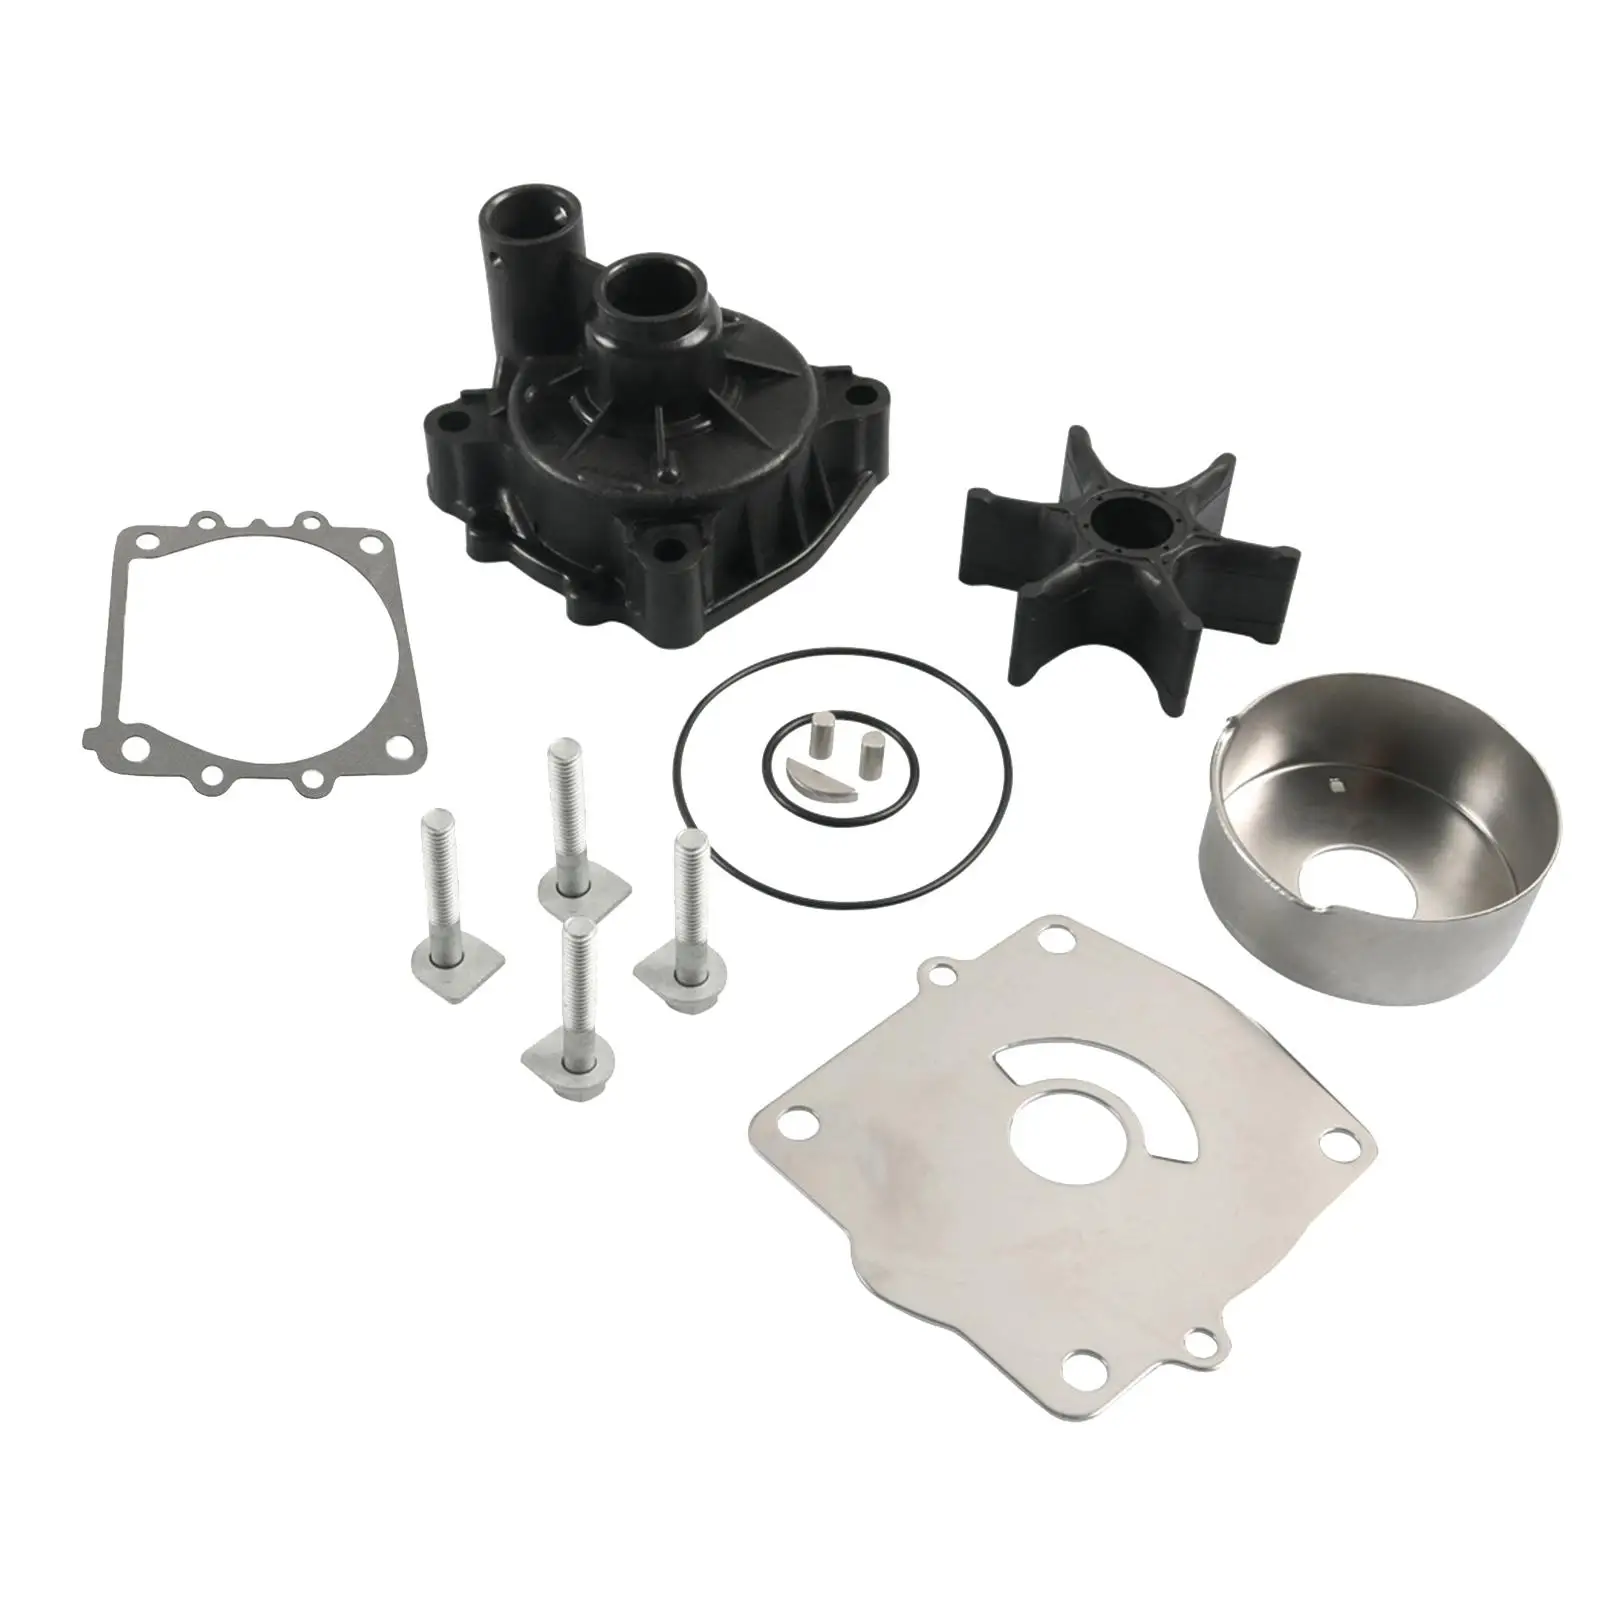 Water Pump Set Replaces Spare Parts 61a-w0078-a2-00 Outboard Water Pump Set